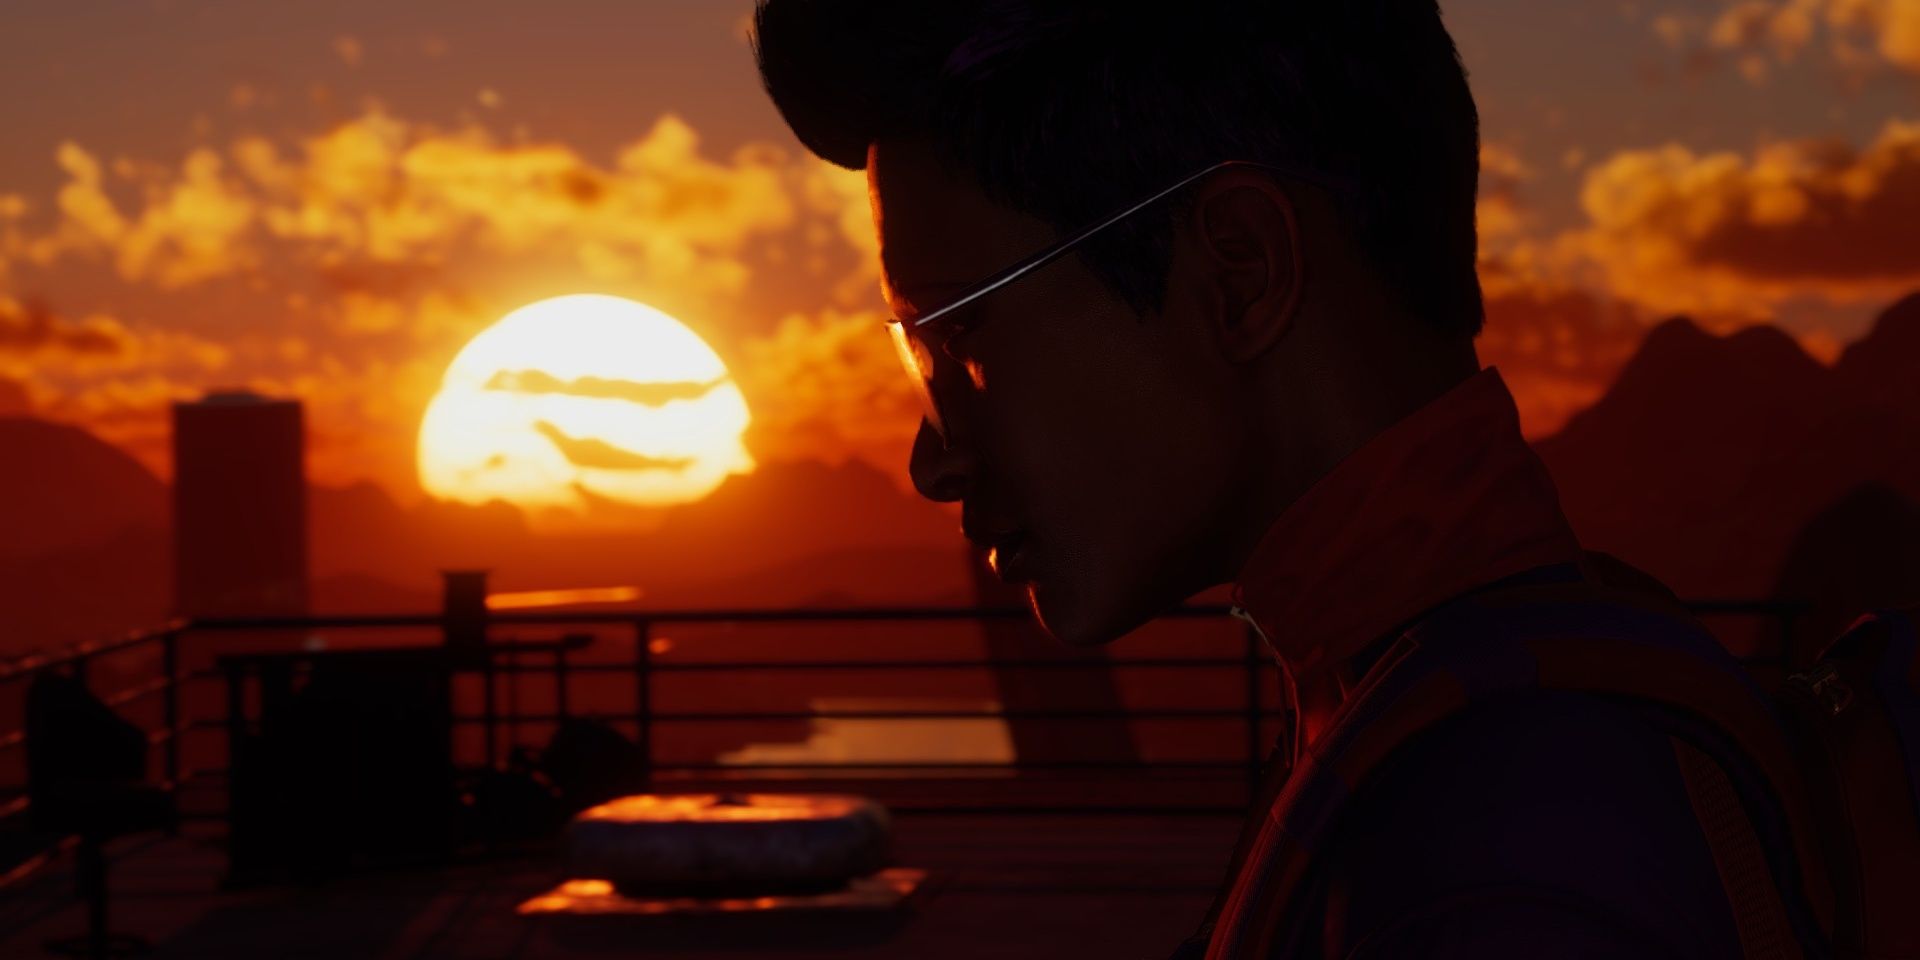 Saints Row The Boss dramatically lit by the sunset at the end of the main storyline